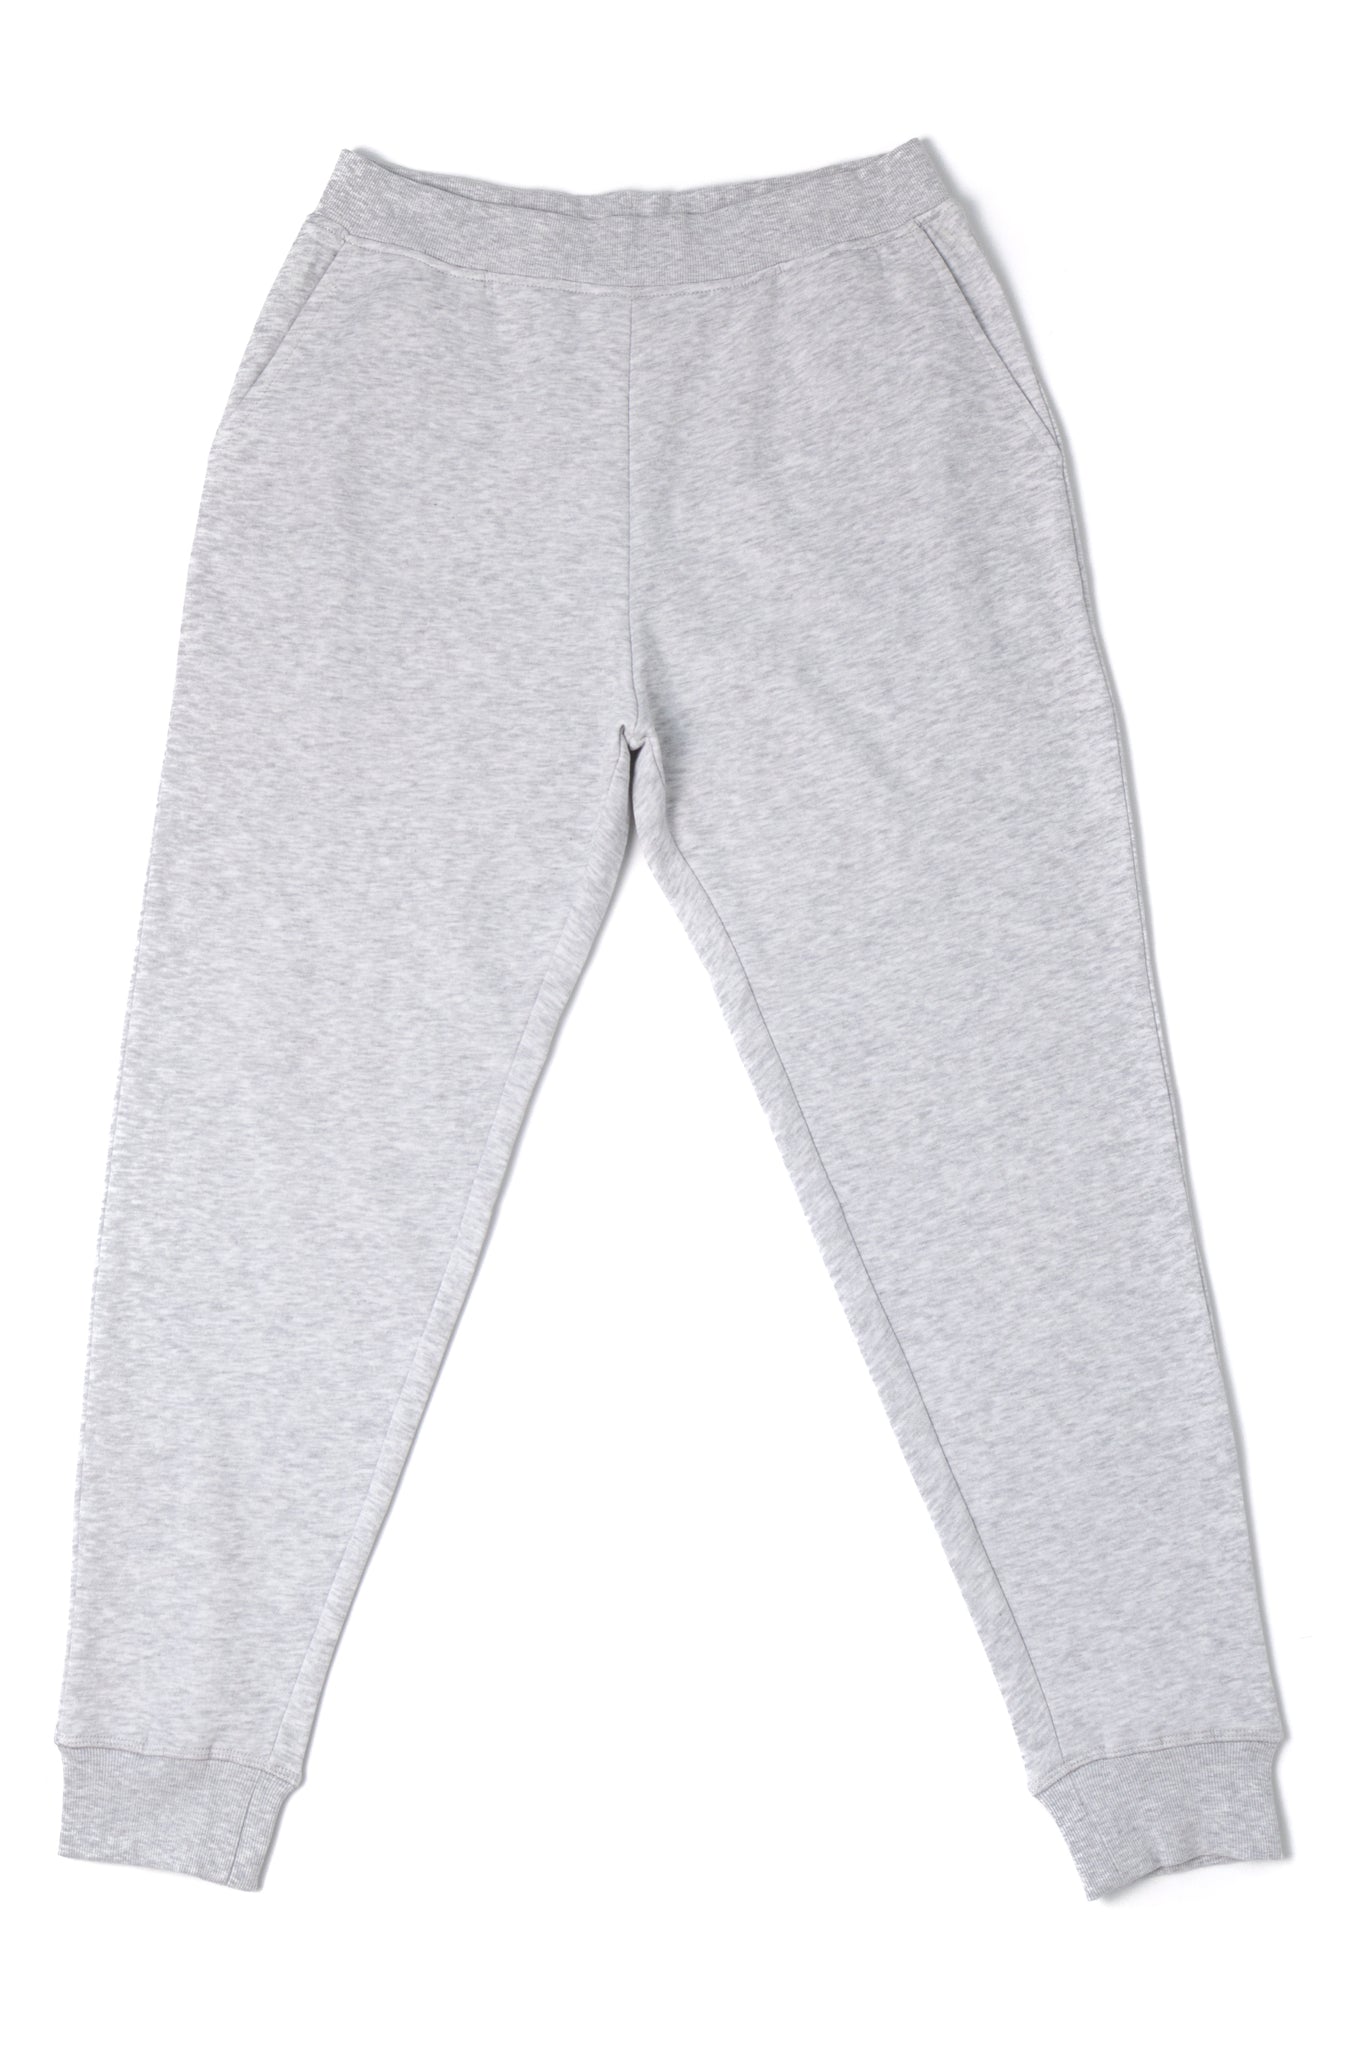 HERO-5020R Youth Joggers - Ash Heather (Relaxed Fit)